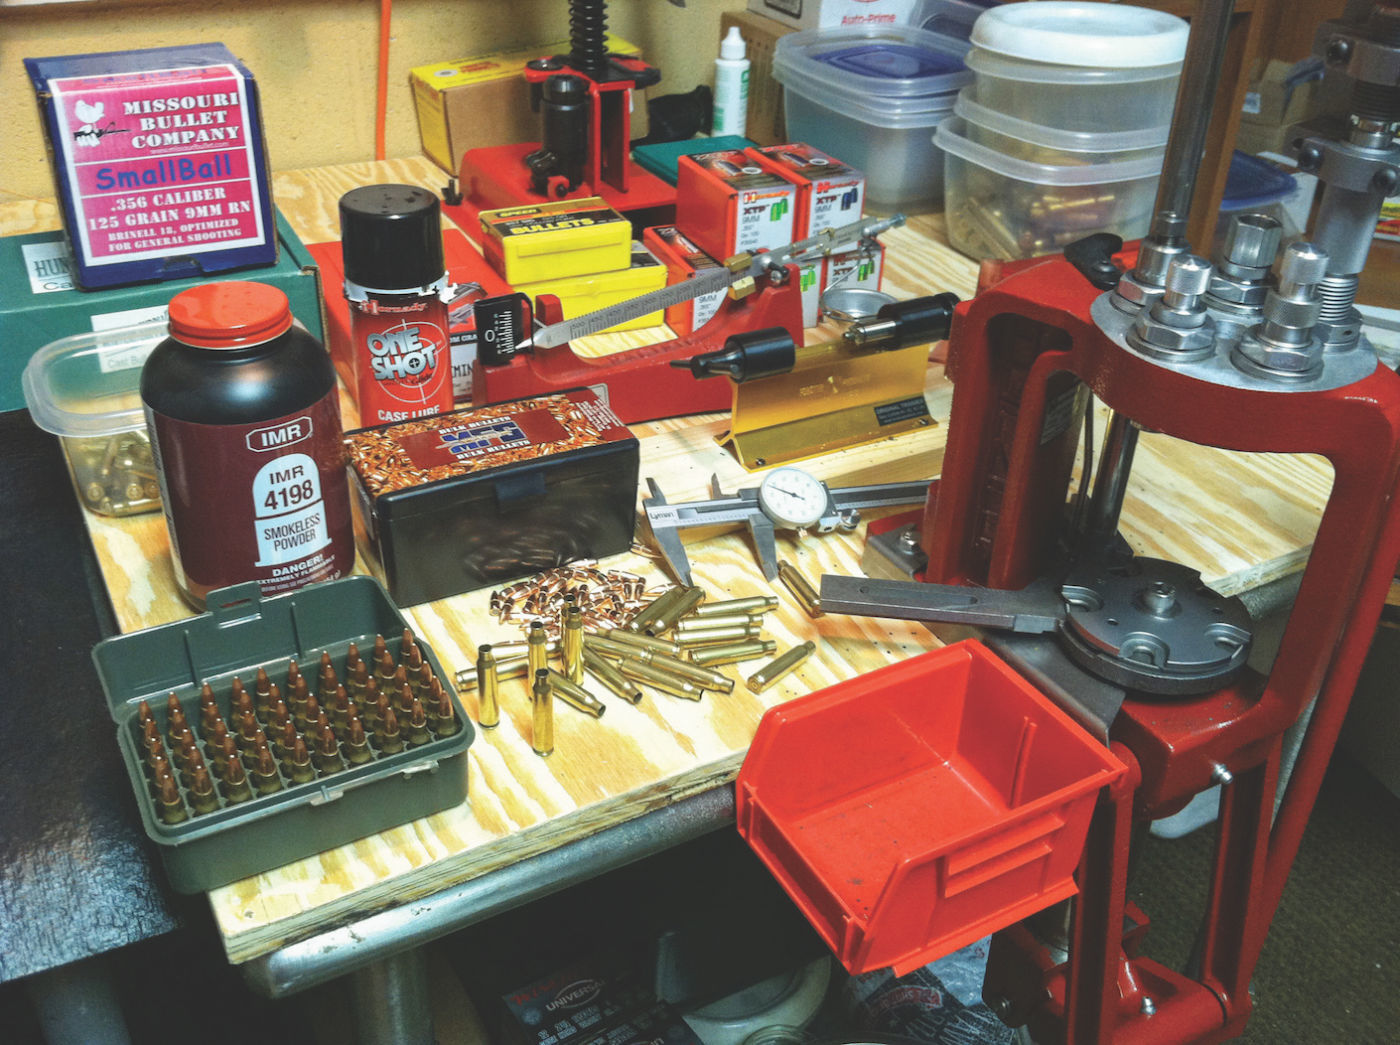 Build an Ammunition Reloading Bench and a Reloading Brass Cleaning